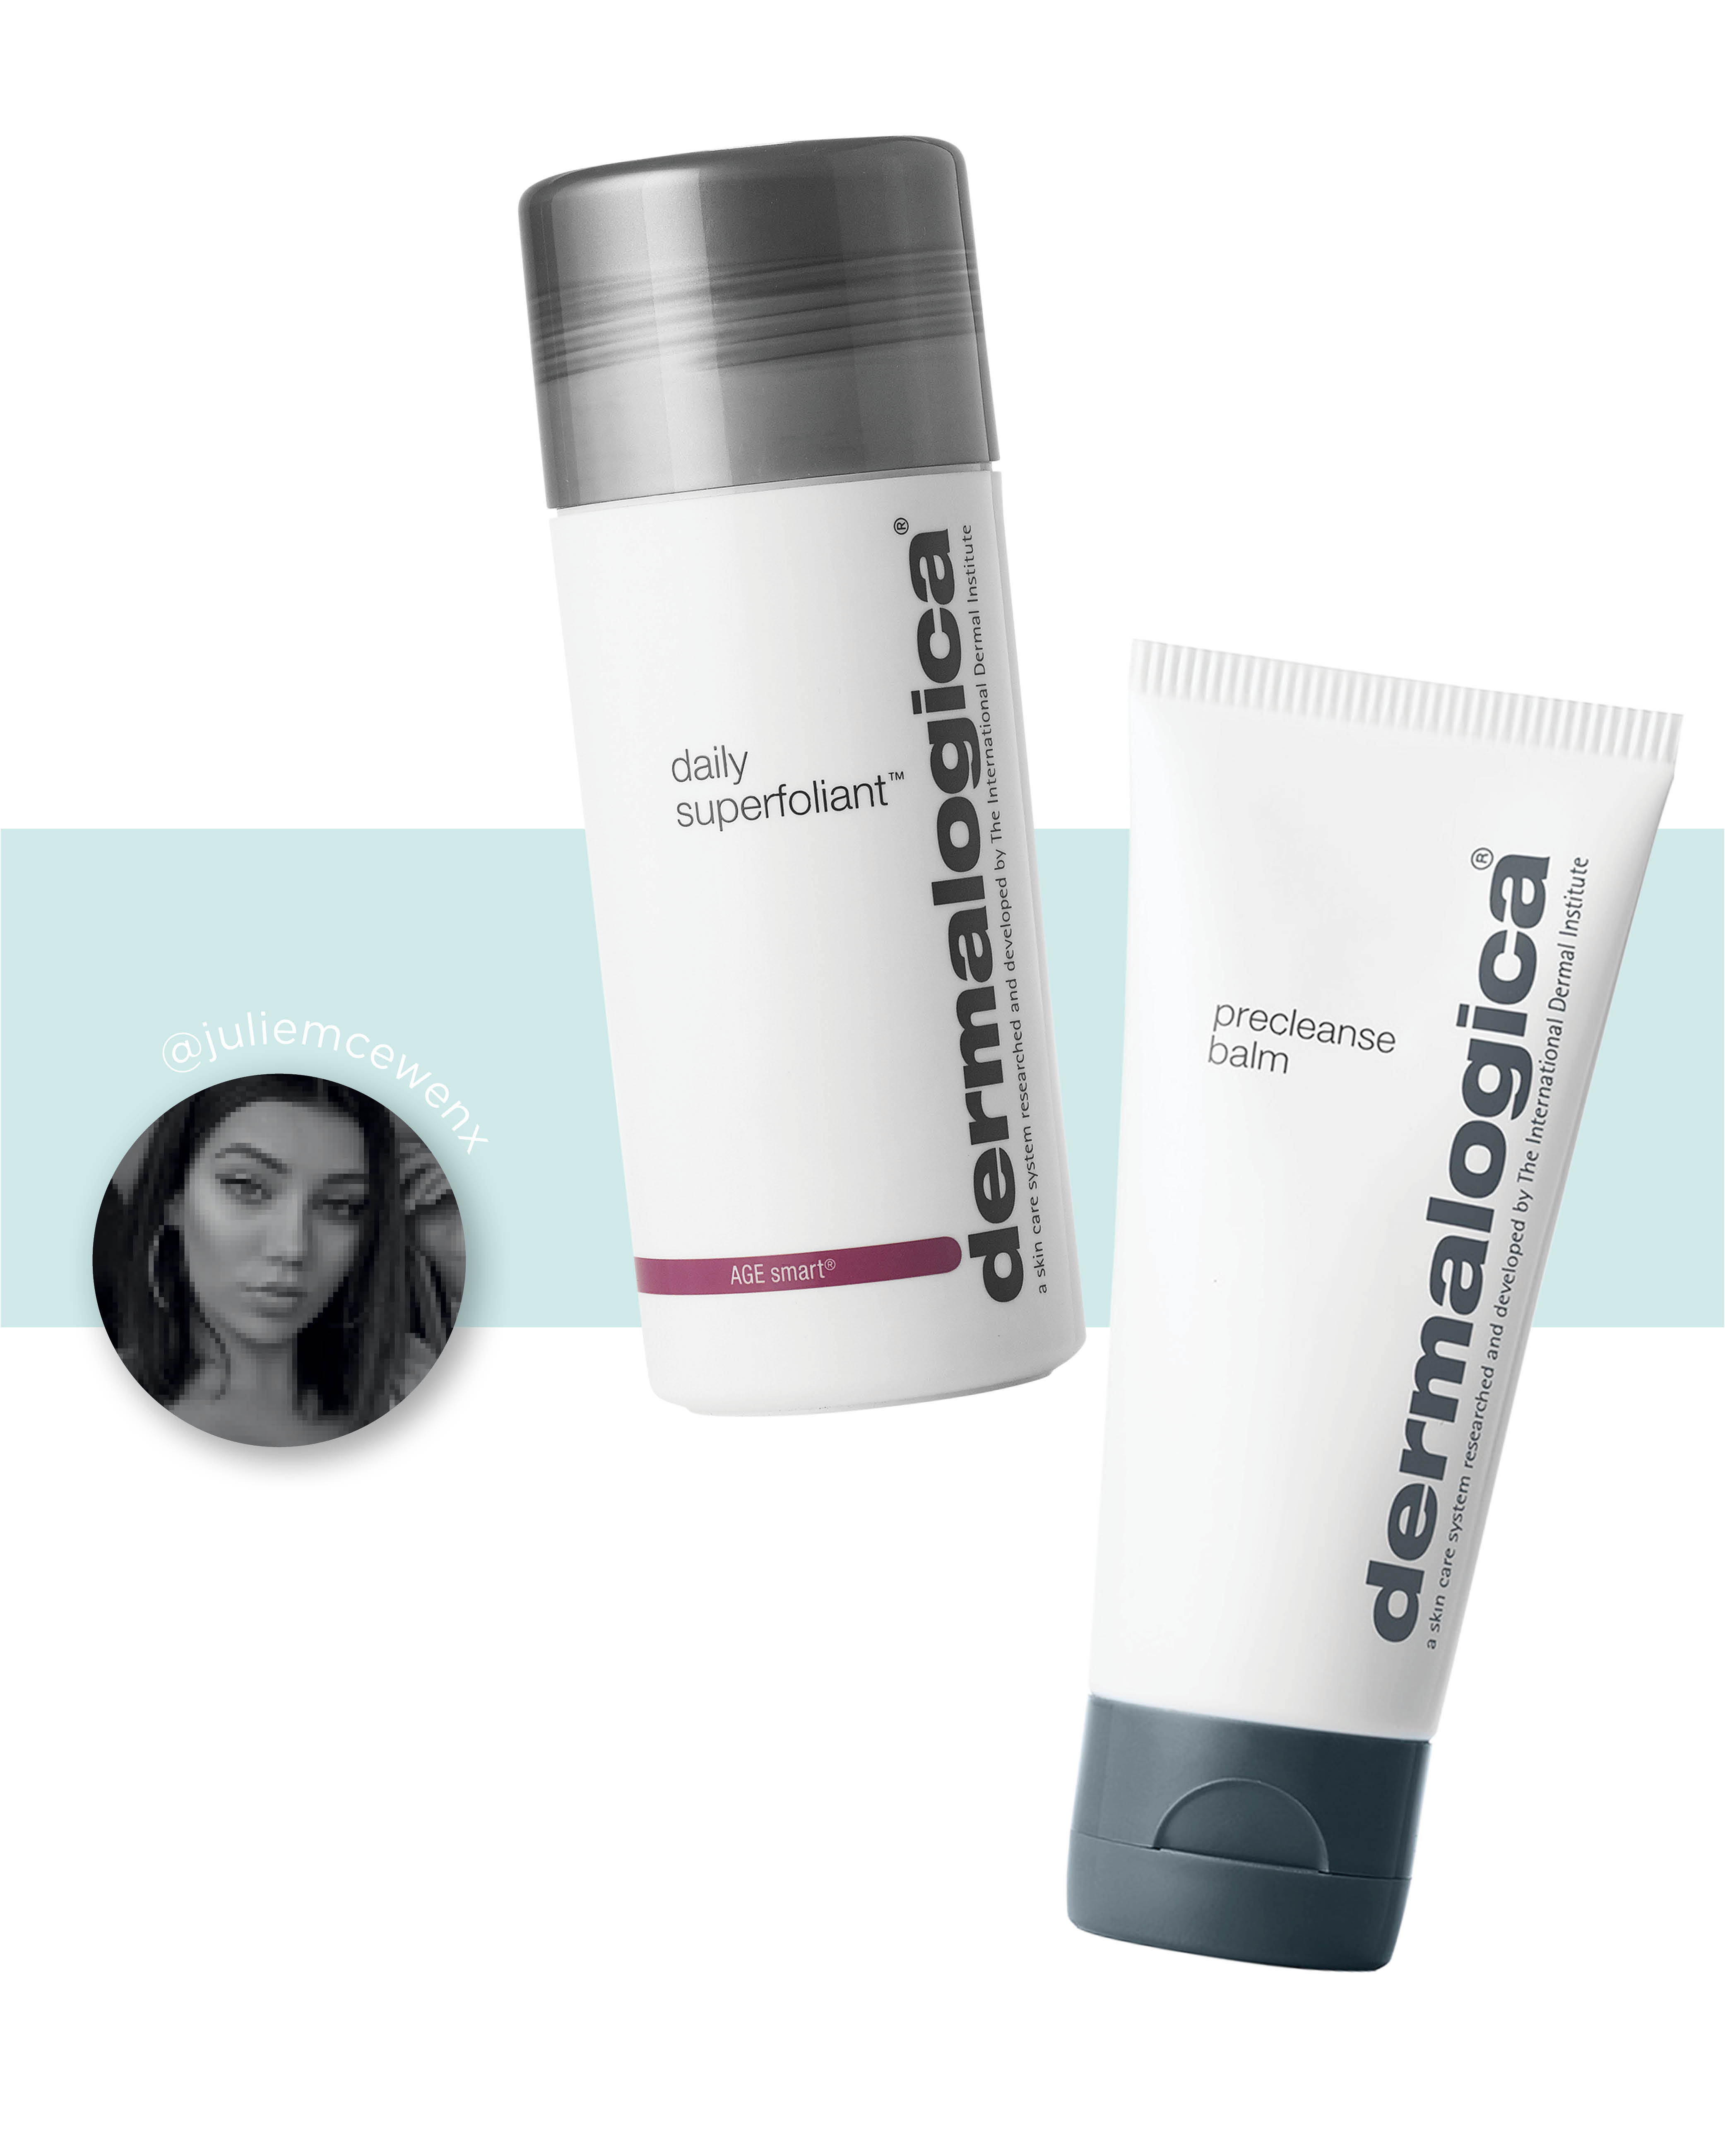 Dermalogica Precleanse Balm, $75, and Daily Superfoliant, $109. I use the balm and follow it with the exfoliating Superfoliant powder. It’s an absolute killer combo that leaves skin feeling fresh, clean and renewed.